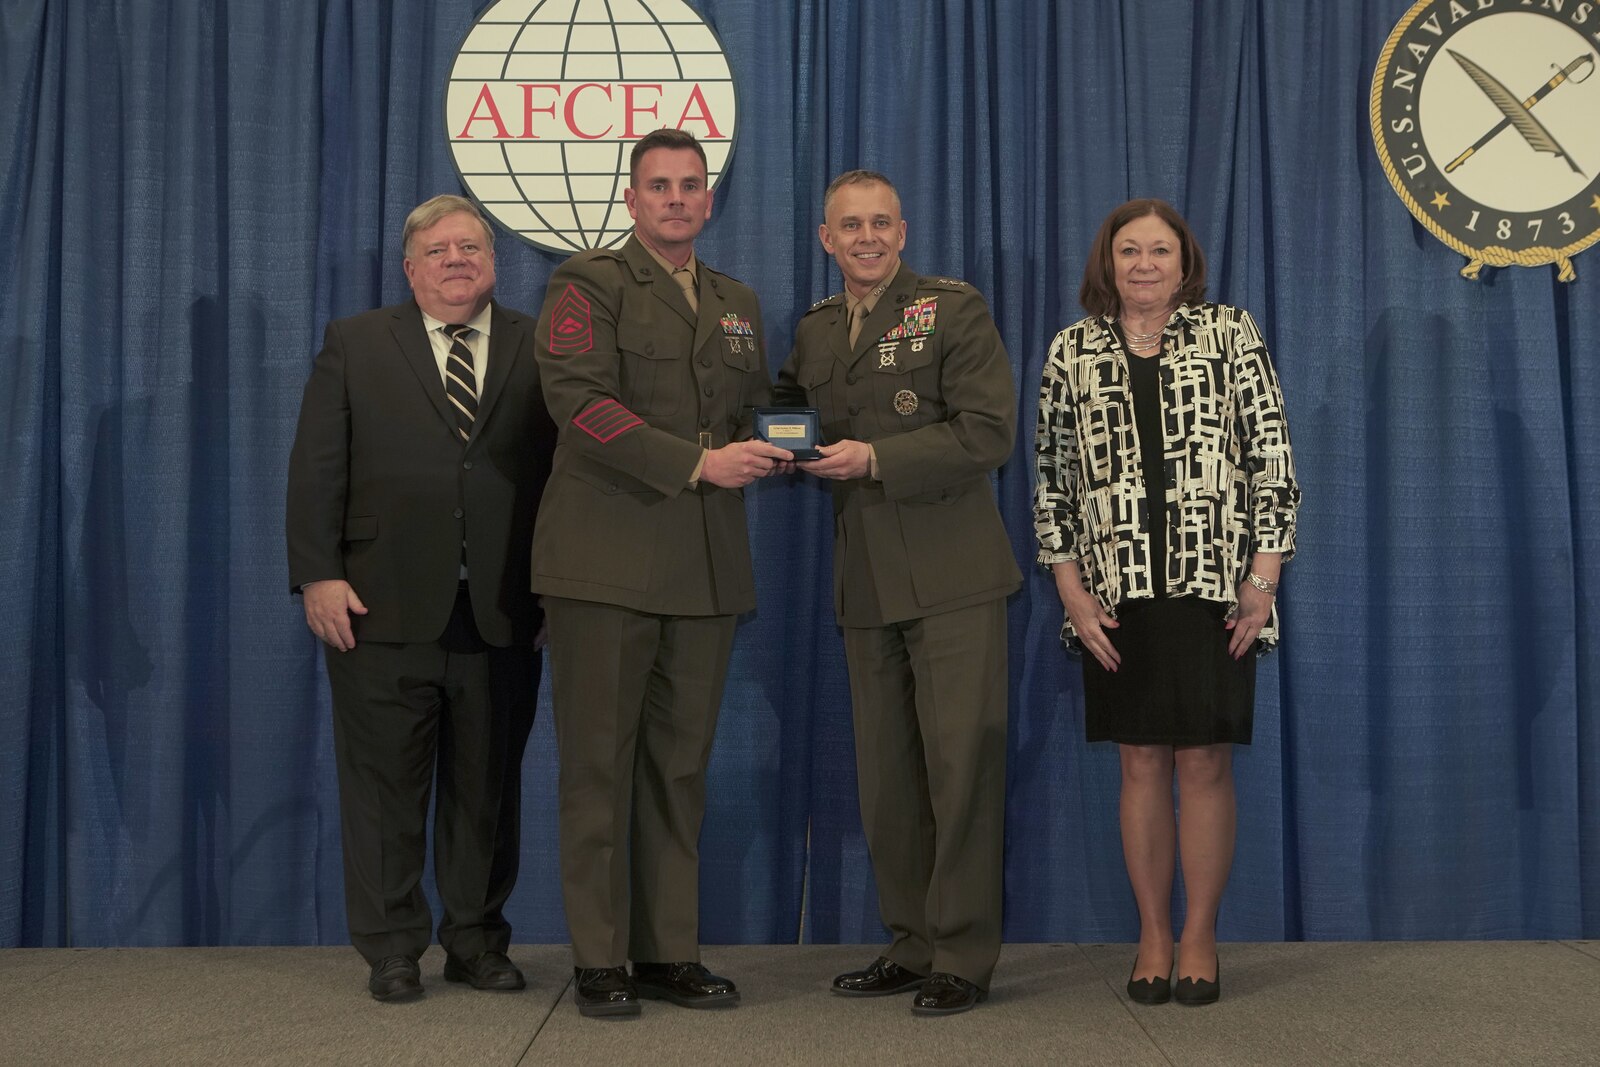 The Copernicus Award honors recipients for their consistent and superior performance in their command, control, communications, computers and intelligence (C4I)/ information technology-related job fields. (U.S. Marine Corps photo by Cpl. Sydney Smith)